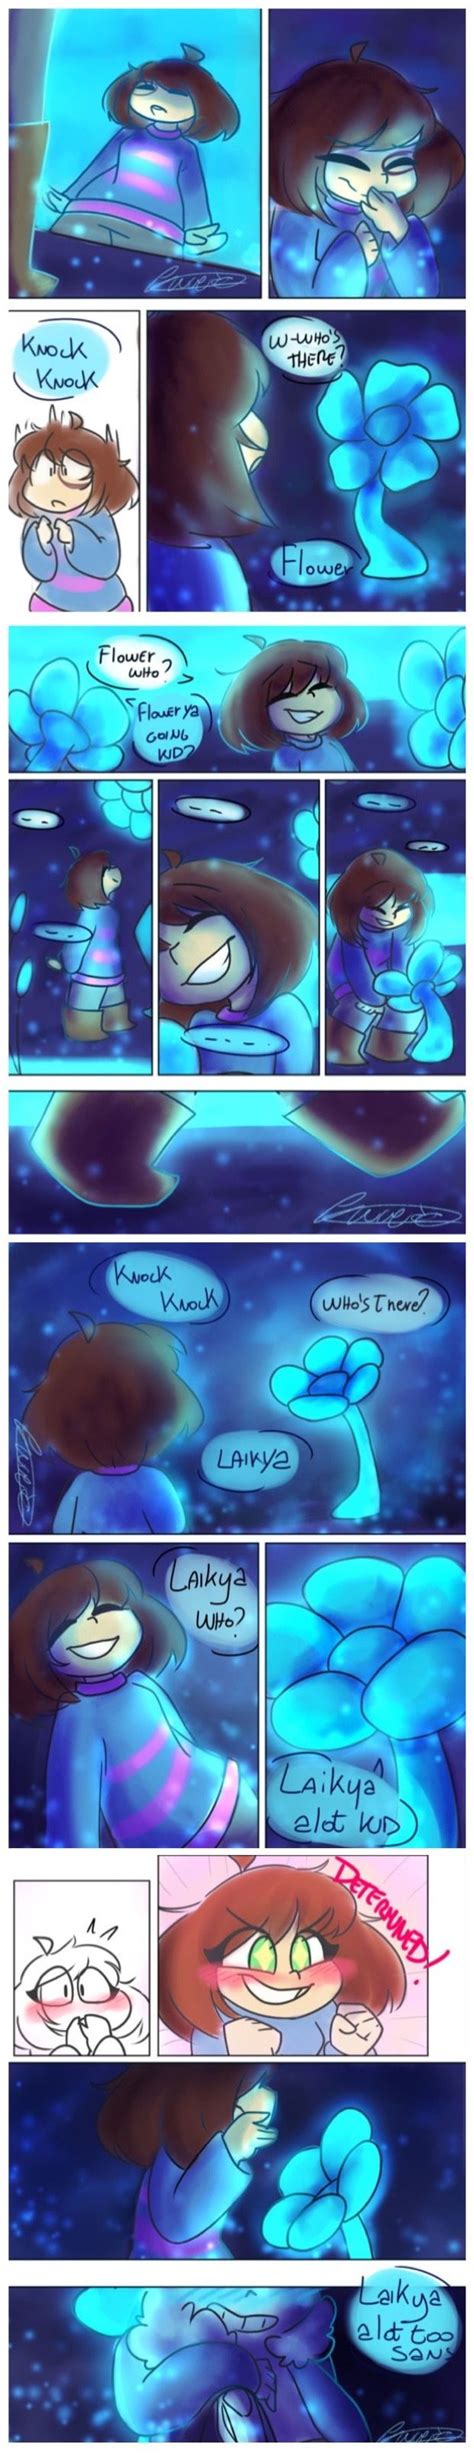 Frans Comic By Live4love136 Tumblr Shes Amazing Frans